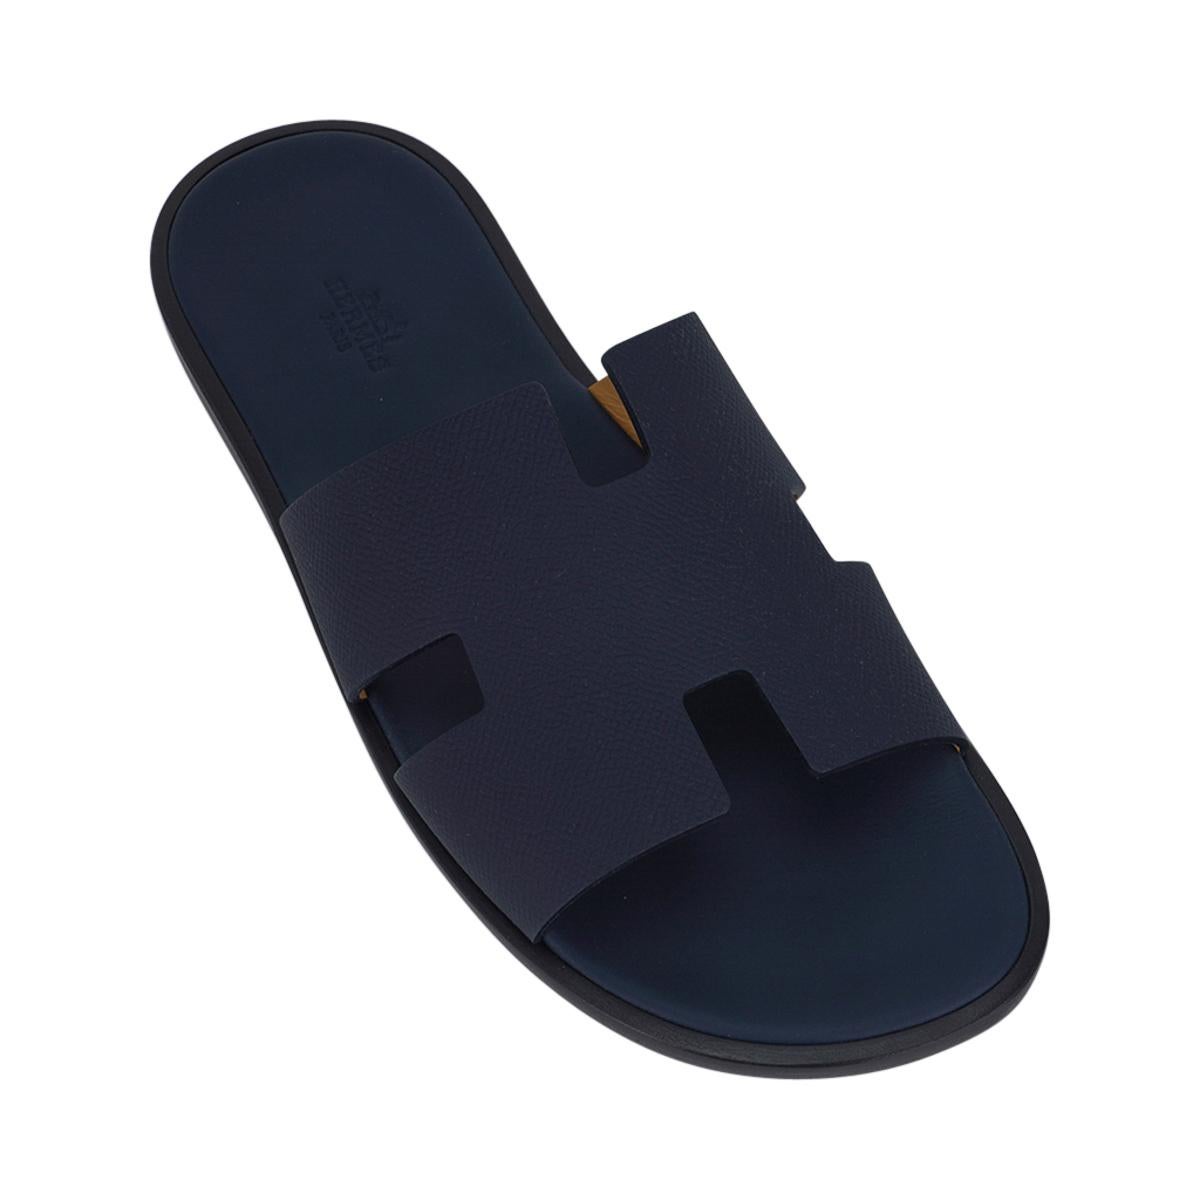 Mightychic offers a pair of Hermes Men's Izmir sandal featured in Marine - a deep navy blue.
The iconic H cutout over the top of the foot in sublime calfskin leather.
Sophisticated colour in a silhouette that works for every wardrobe.
Wood heel with